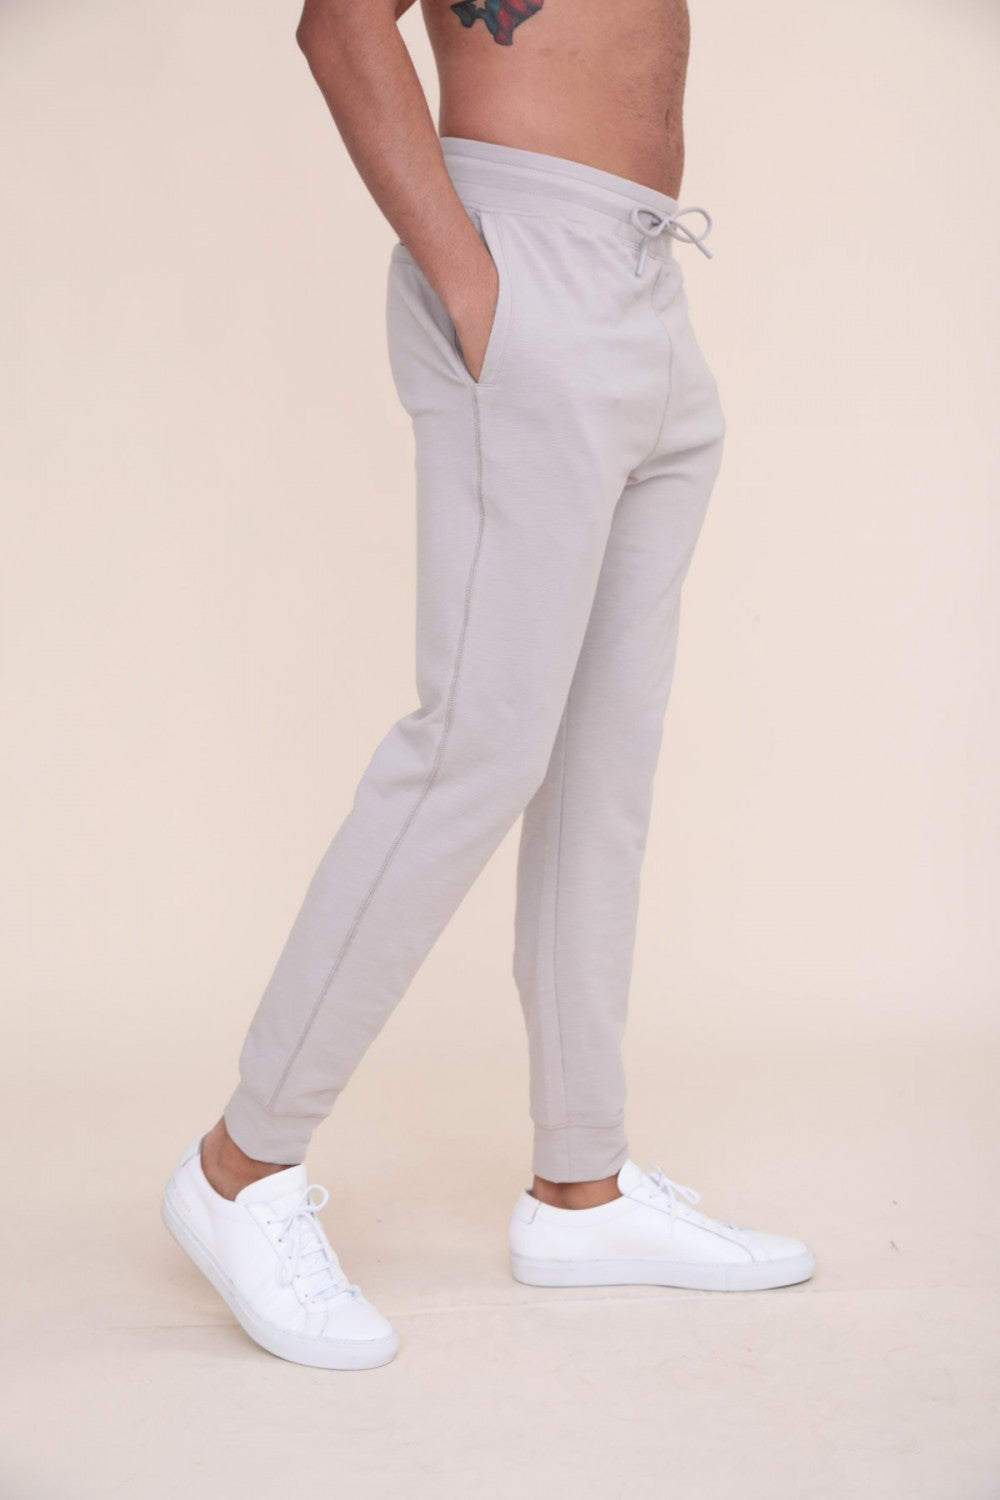 Keep it simple with these elevated joggers. They have a drawstring waistband, single zipper back pocket, and a stitch part way up the back of the legs.